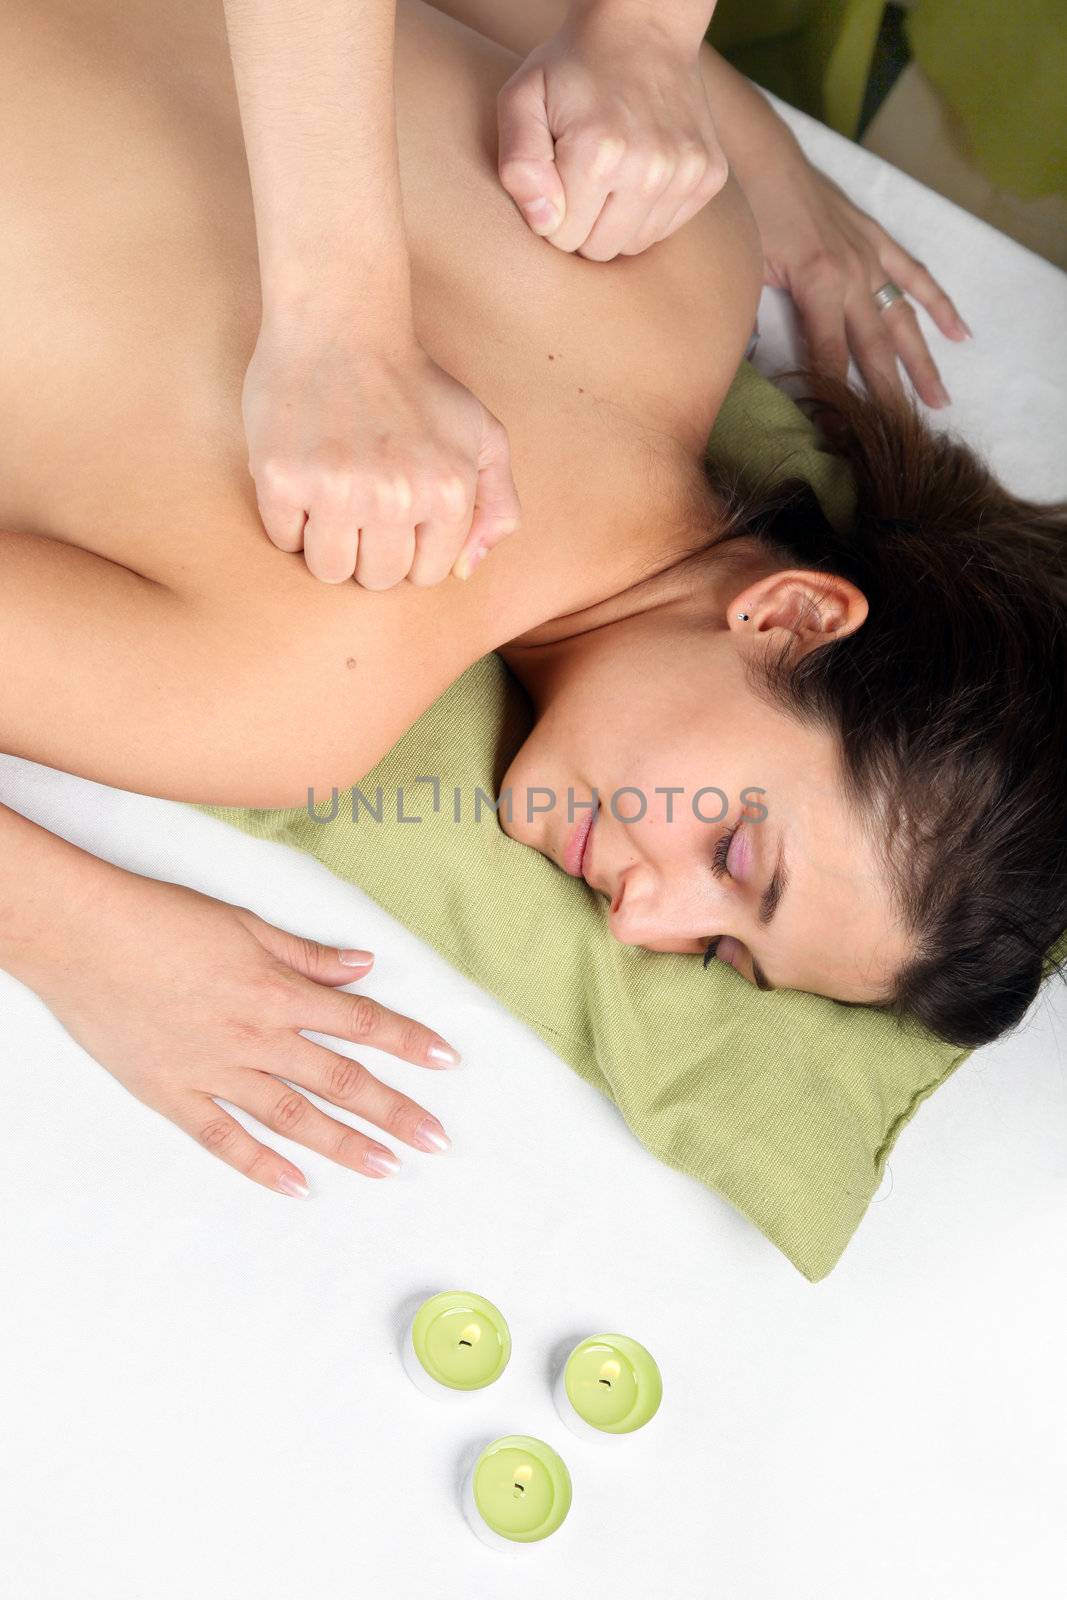 A young woman receives a massage. She lies on her stomach and the masseur
massages the back of the woman.
 